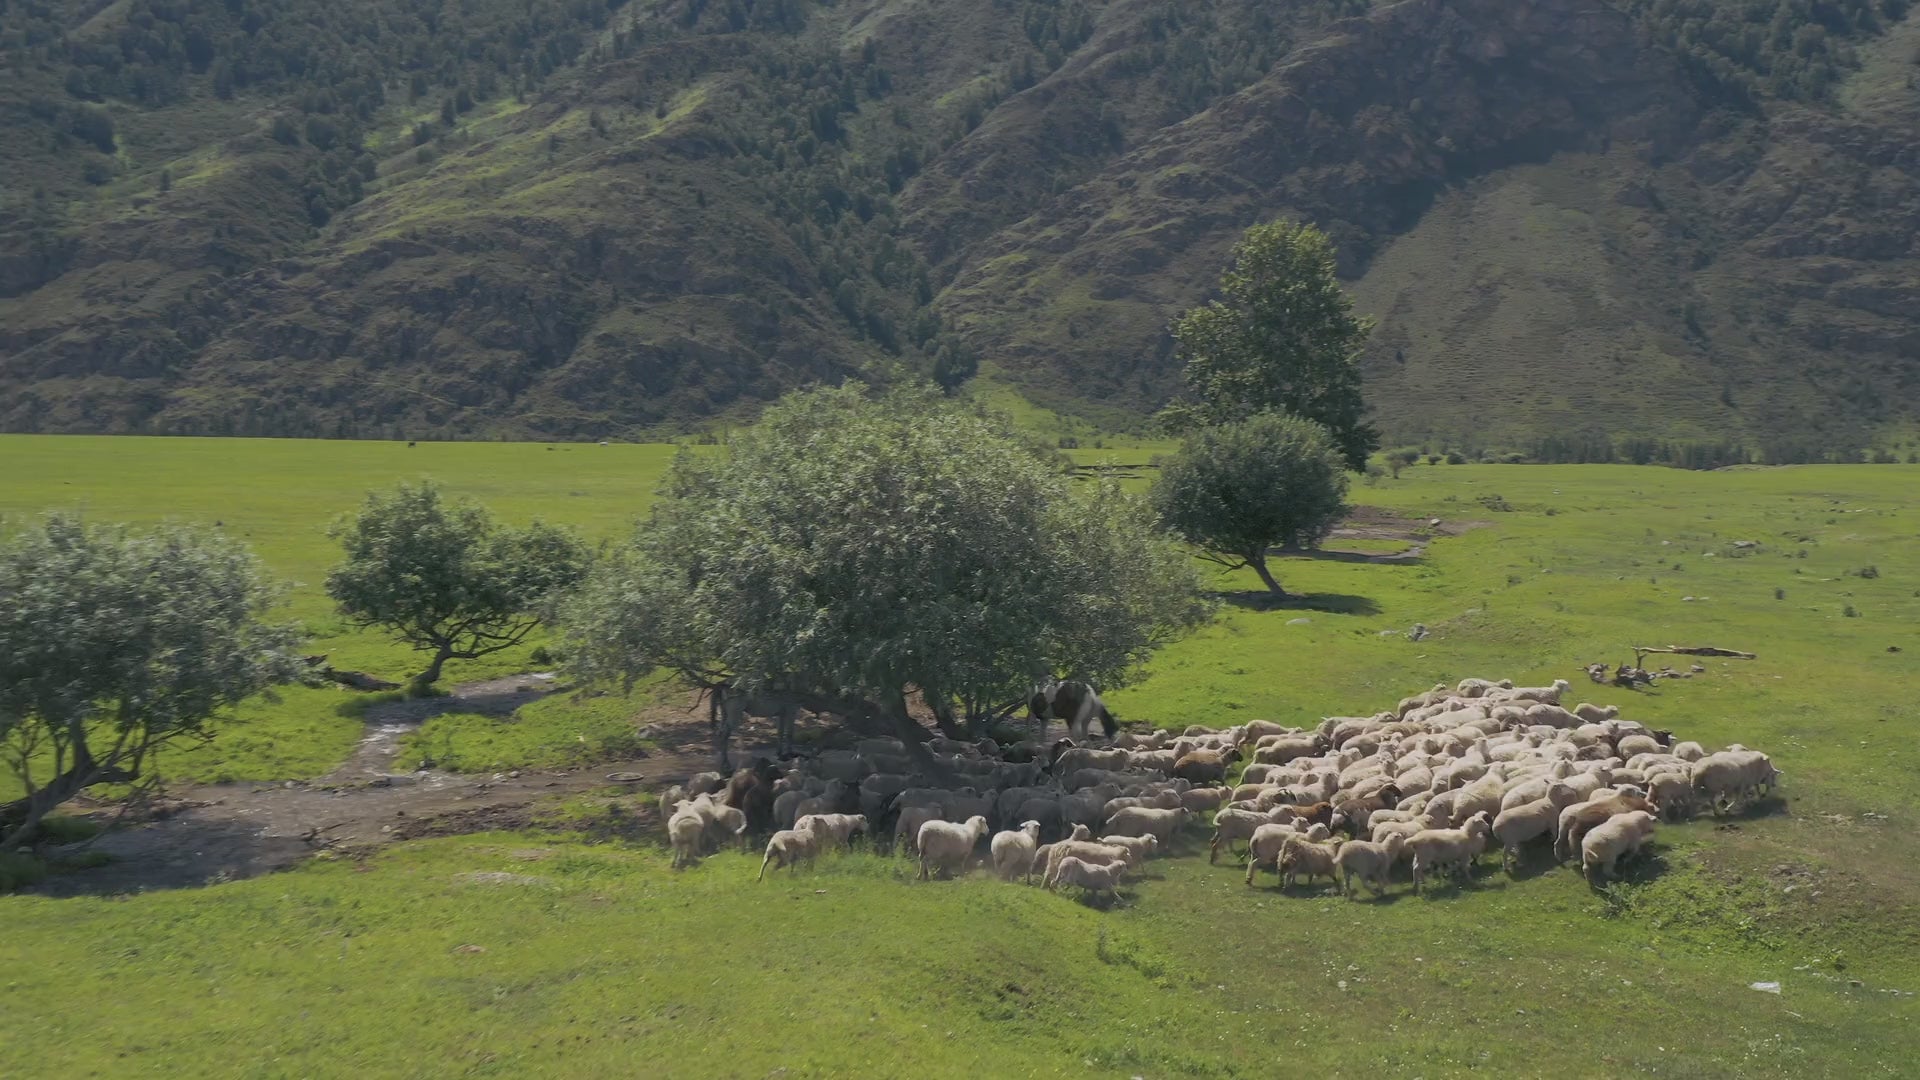 Load video: Many sheep are running in the field